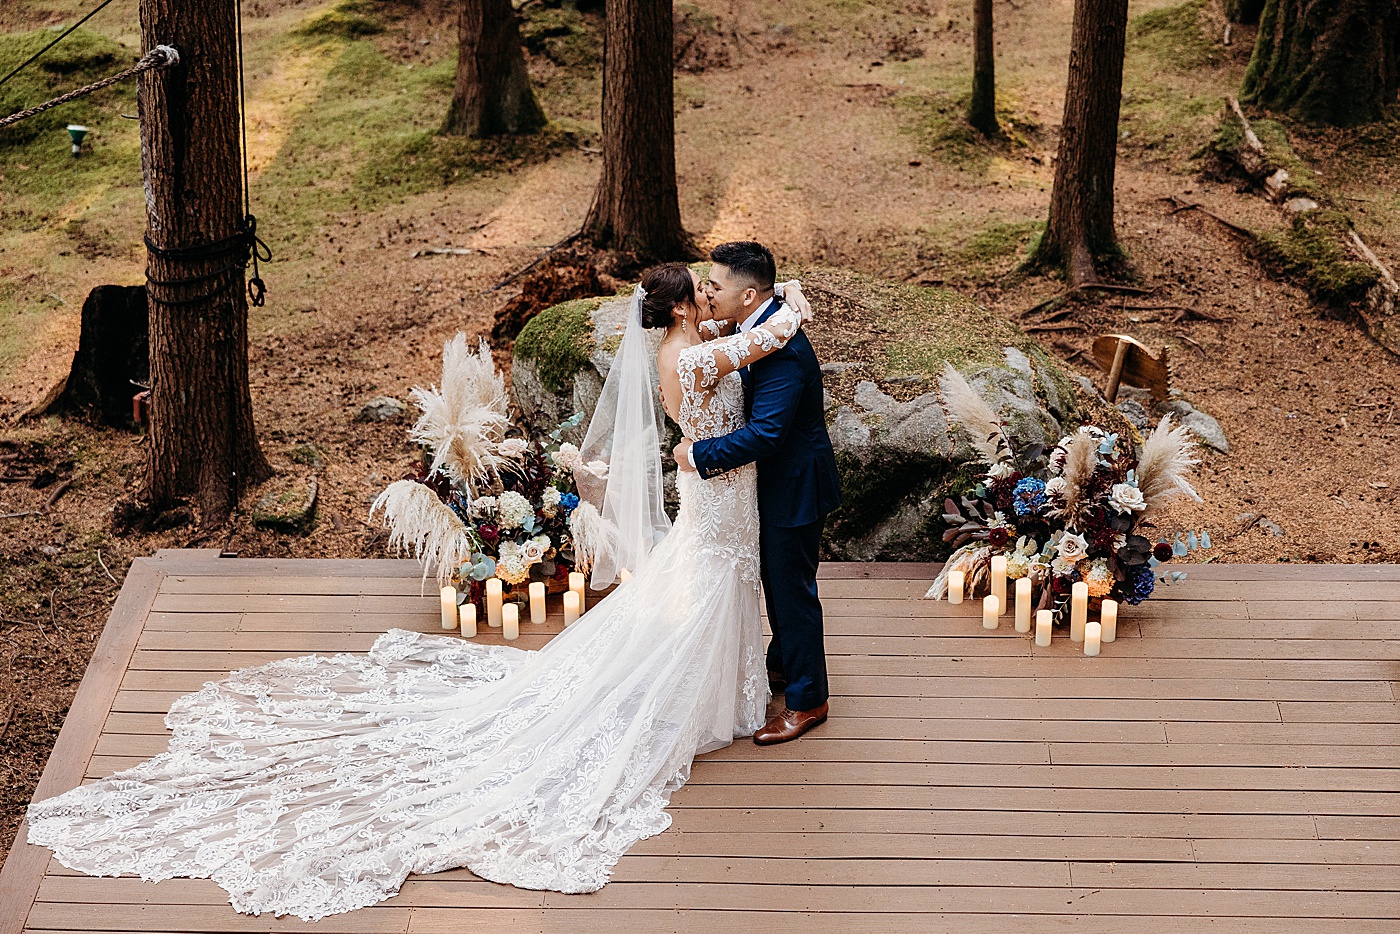 Bride and groom first kiss at Emerald Forest Treehouse | Photo by Megan Montalvo Photography